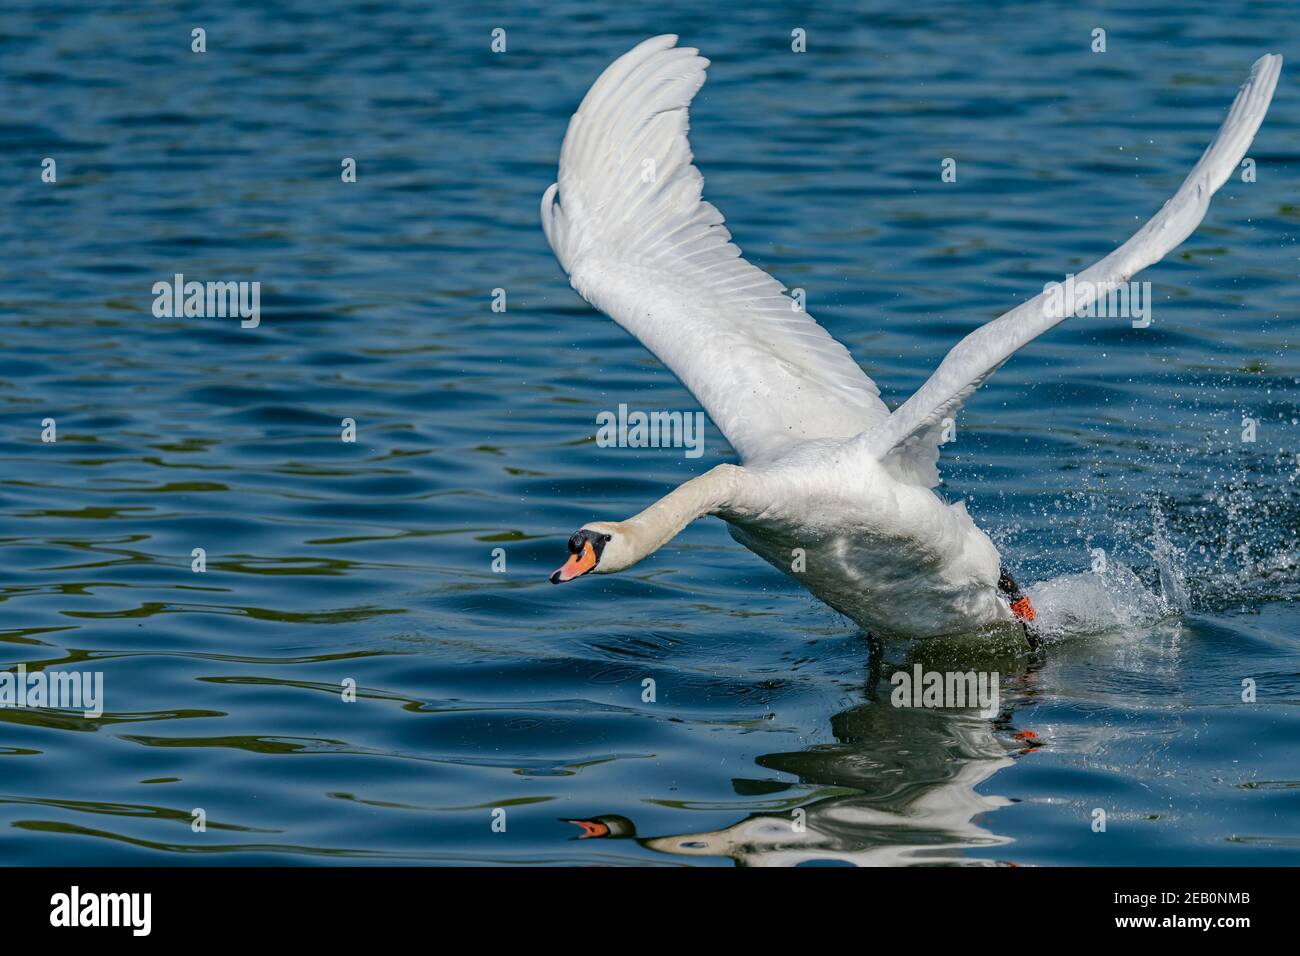 Swan Taking off on a lake Stock Photo